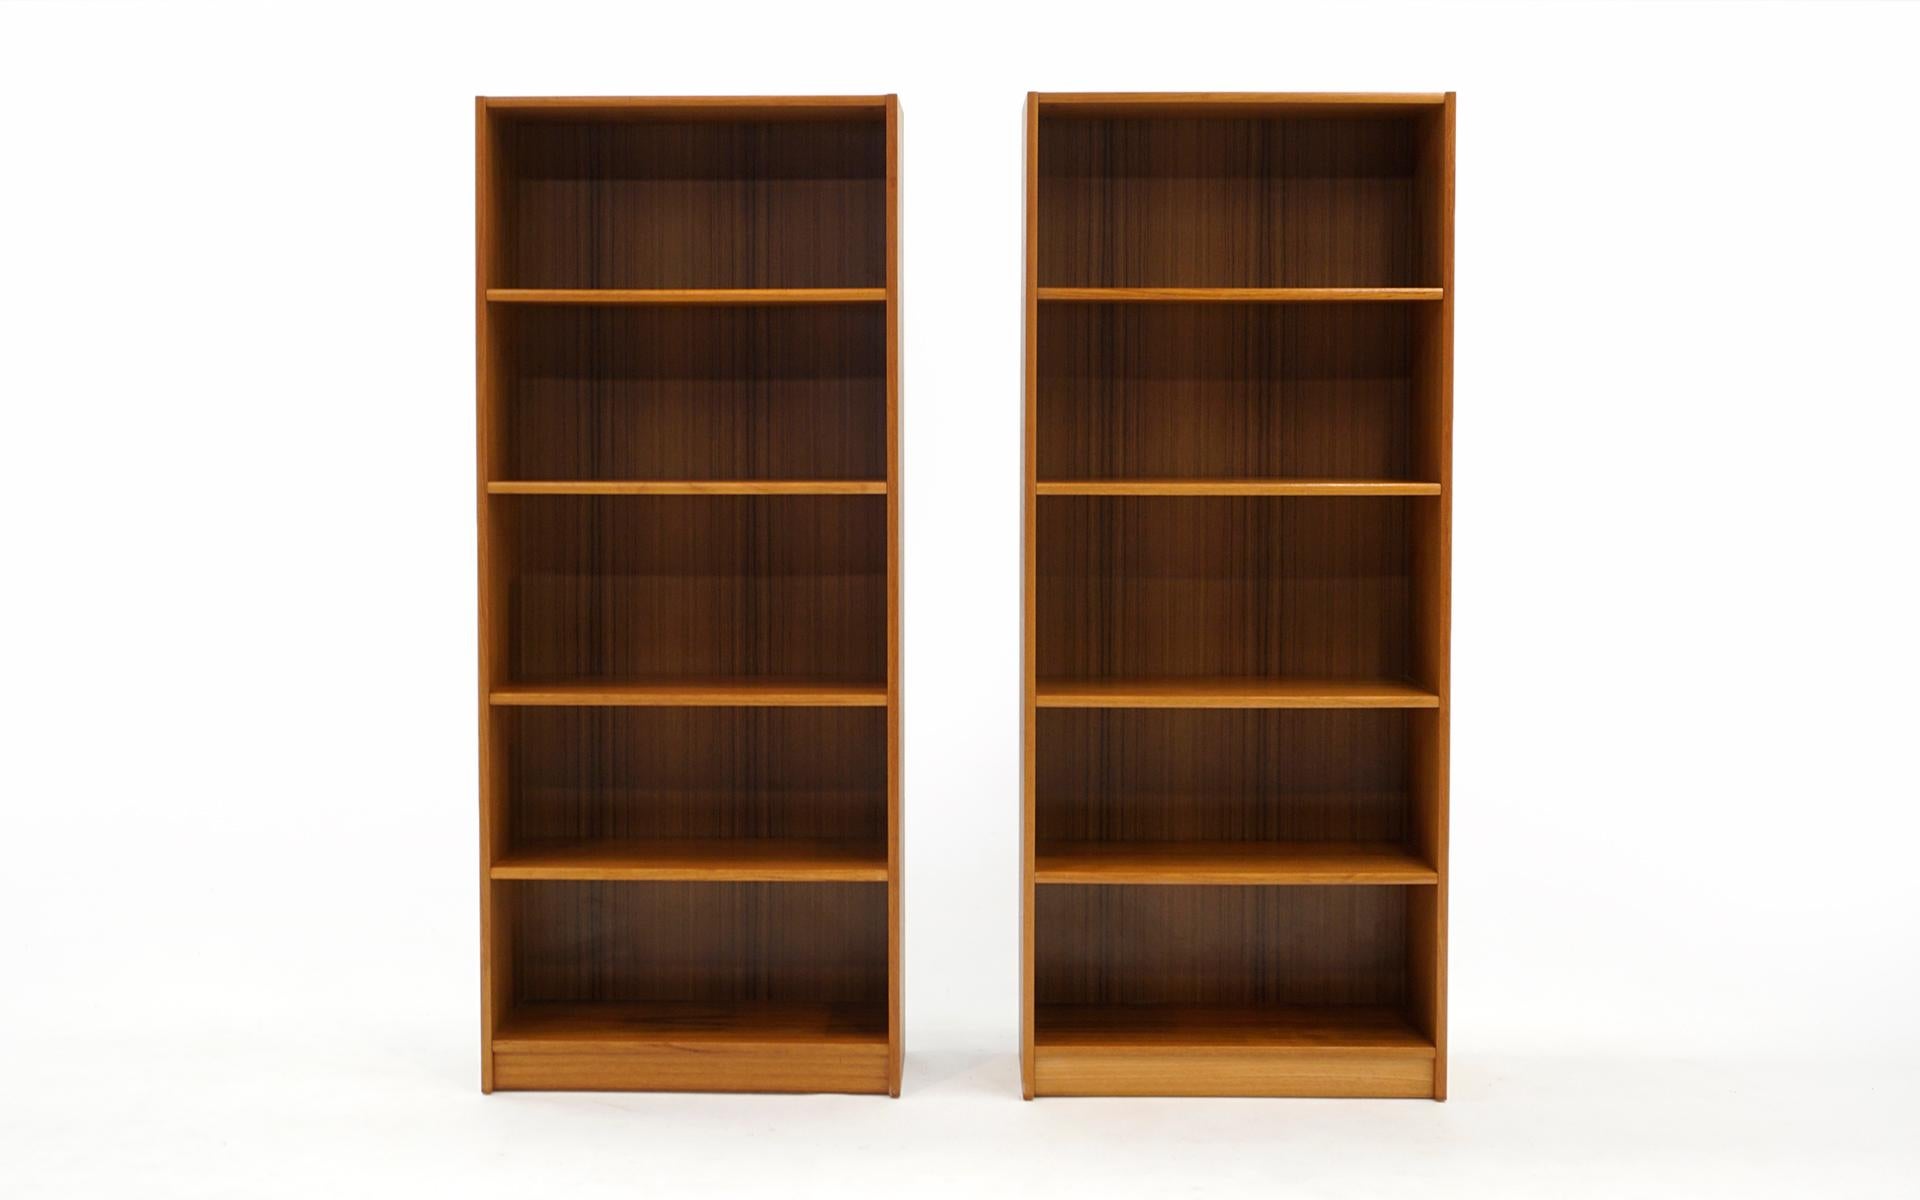 Pair of mid century Danish modern teak bookcases. Price is for each. Both are in very good condition with few signs of wear. There are a few small blemishes that can be seen upon close inspection. Ready to use.